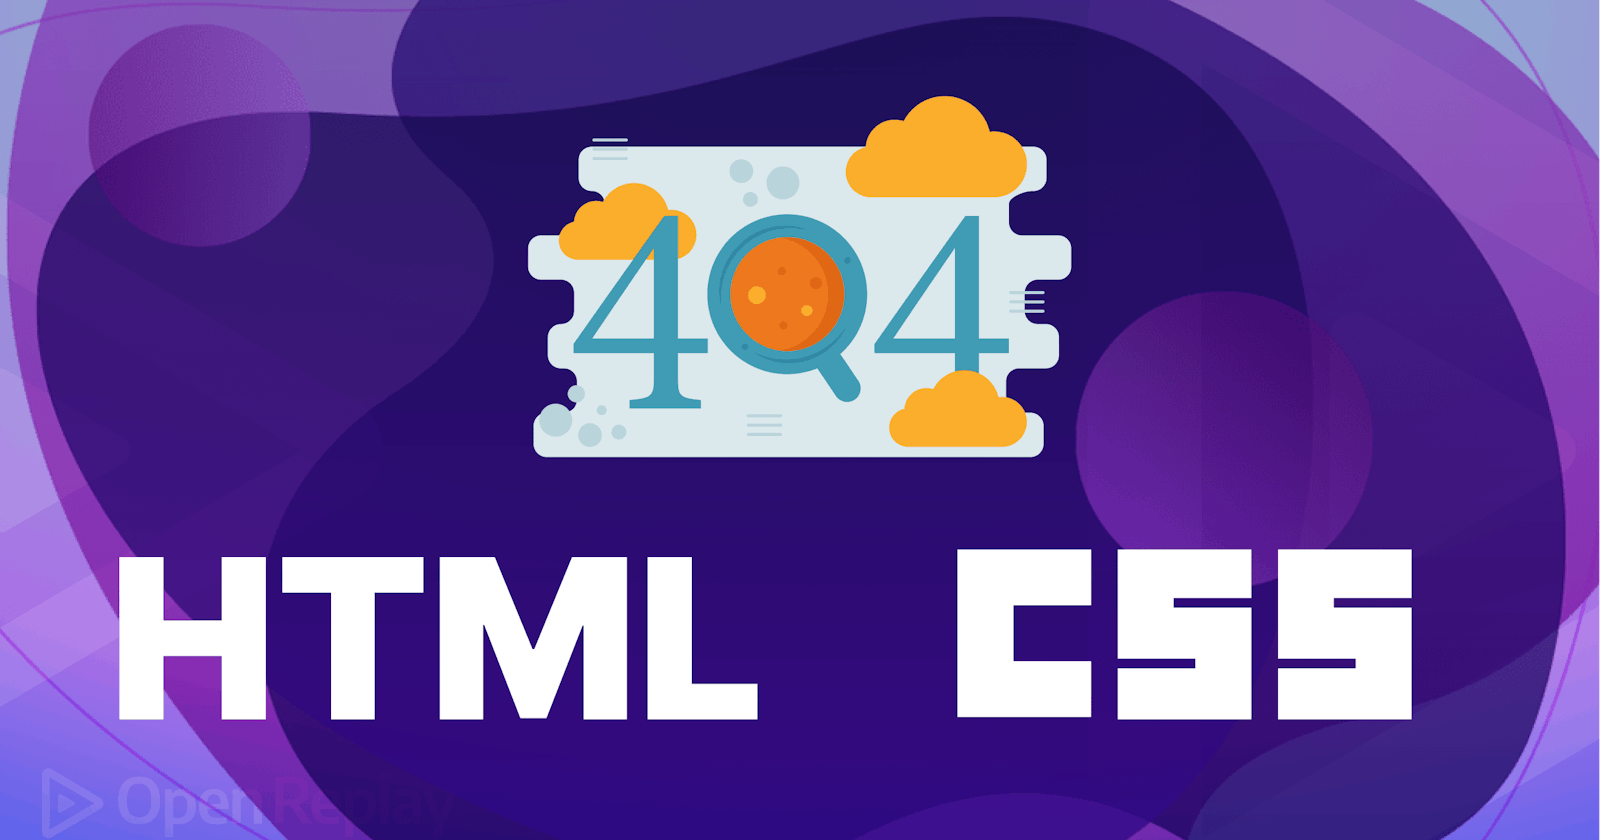 Creating a custom 404 error page with HTML and CSS